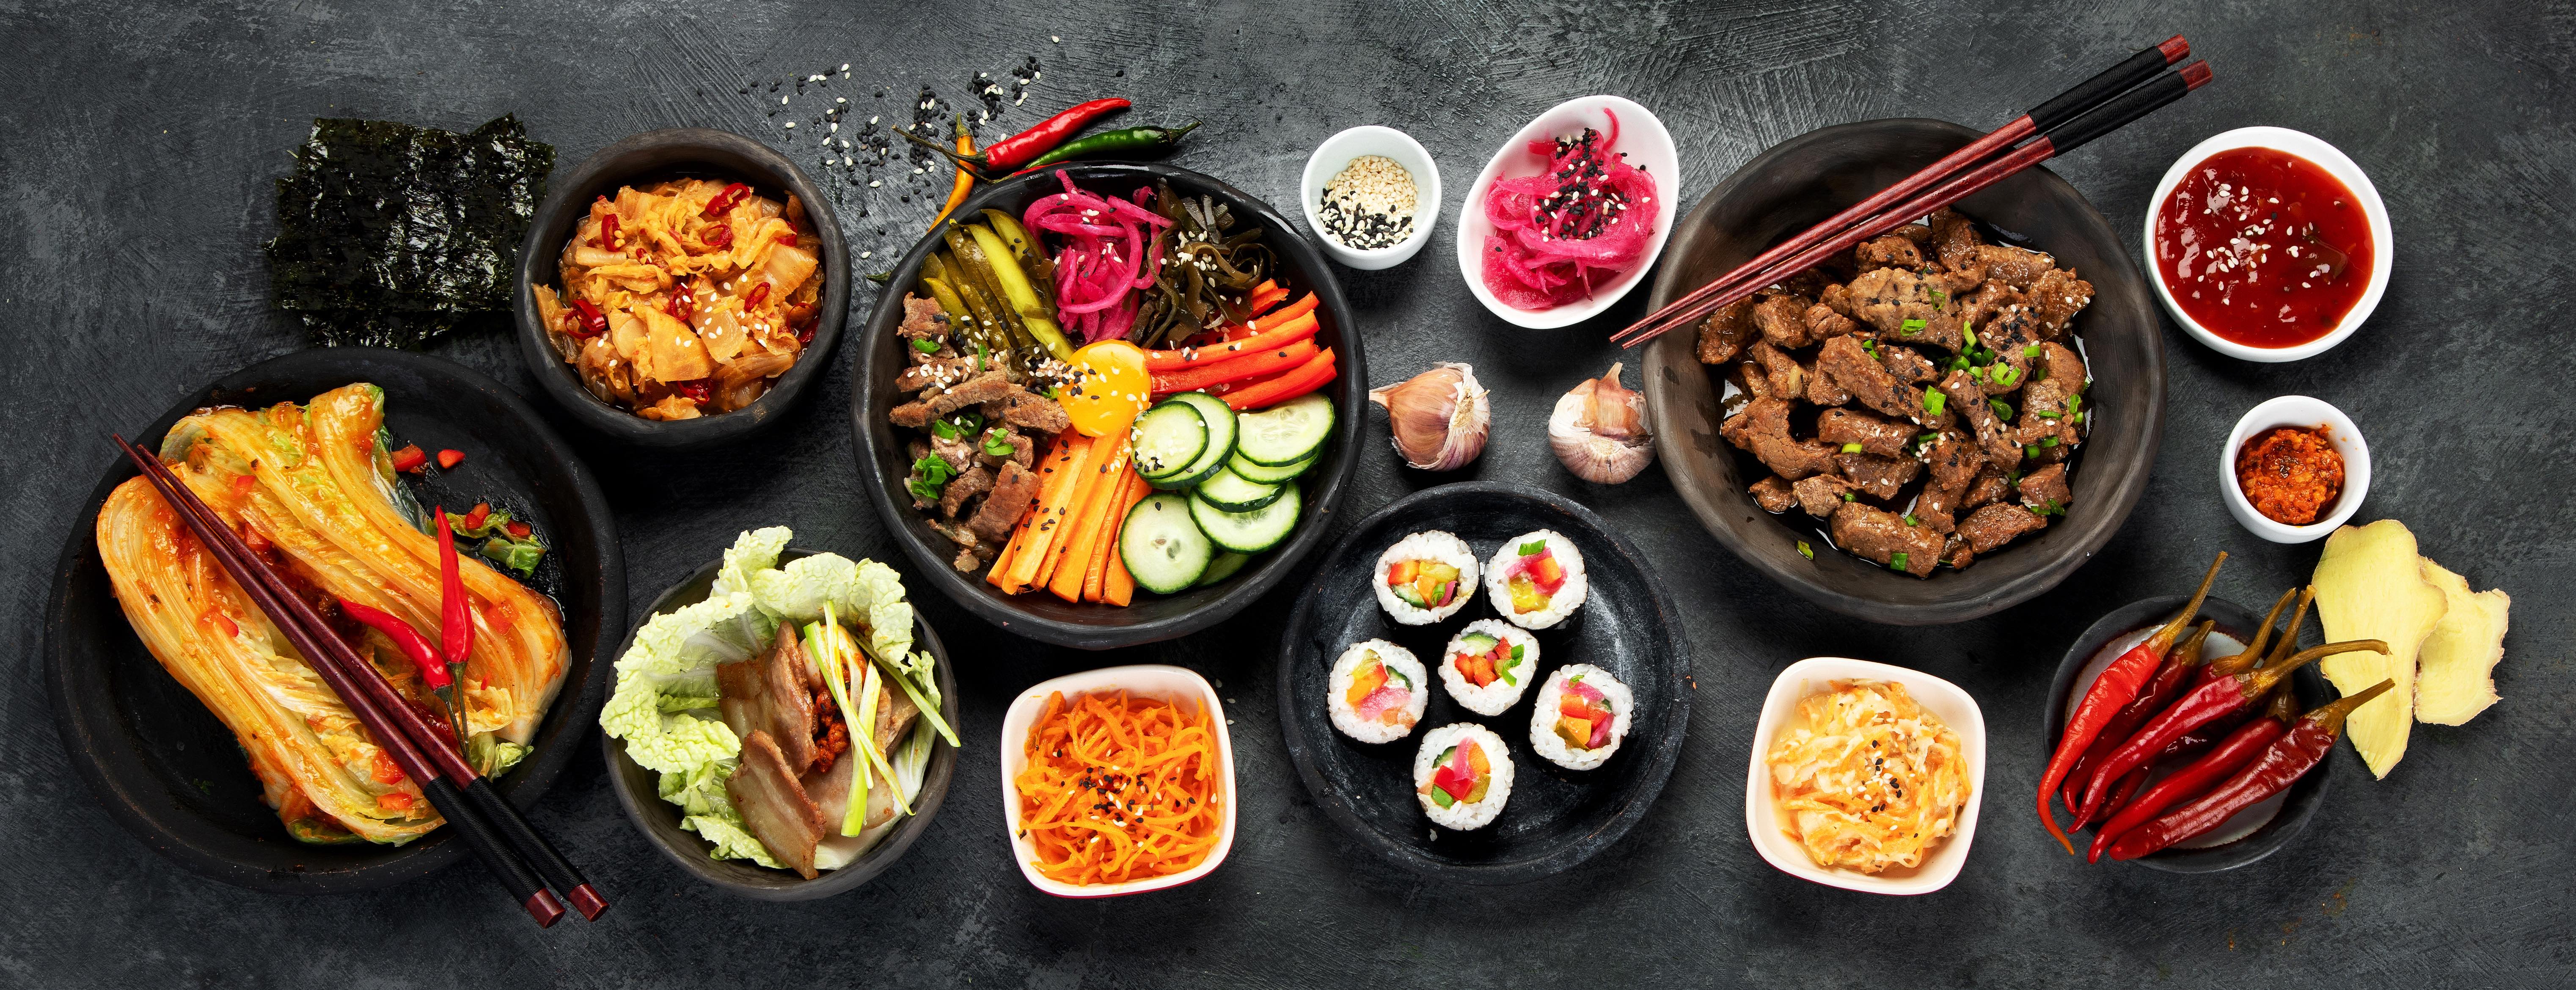 Korean traditional dishes